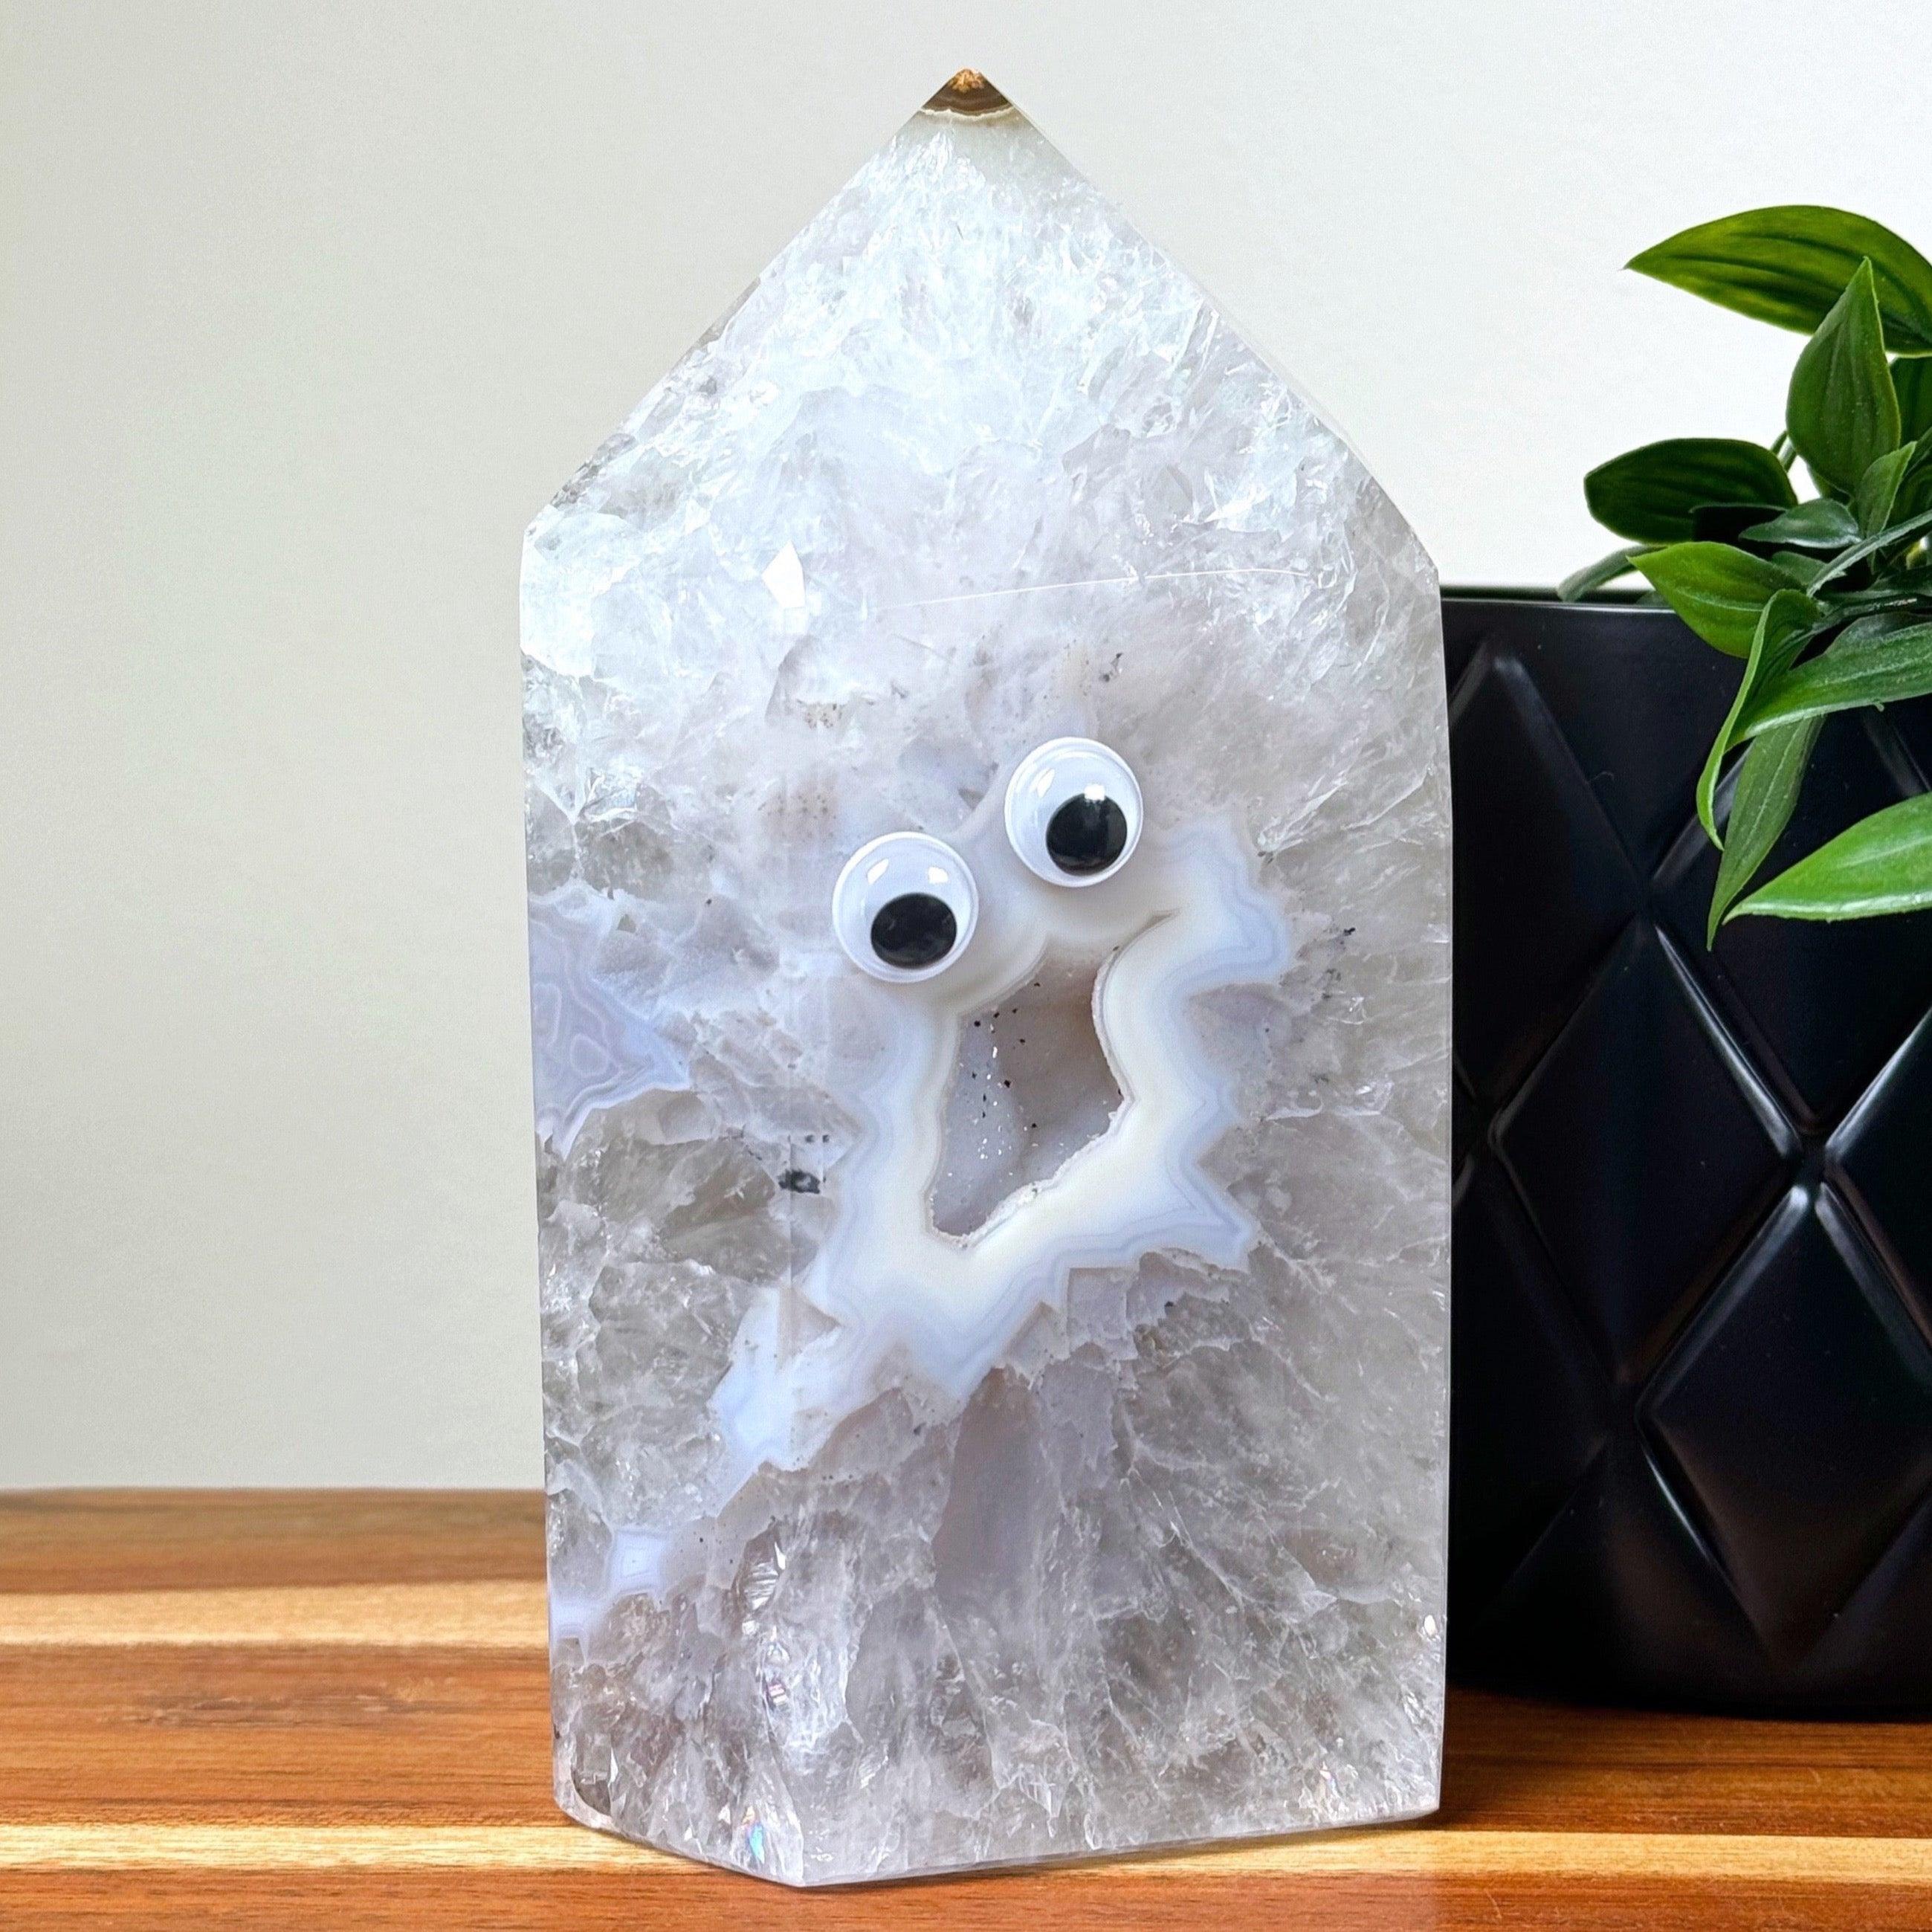 DRUZY AGATE TOWER 1 - agate, druzy agate, googly agate, googly eye, googly eye agate, one of a kind, point, statement piece, tower - The Mineral Maven